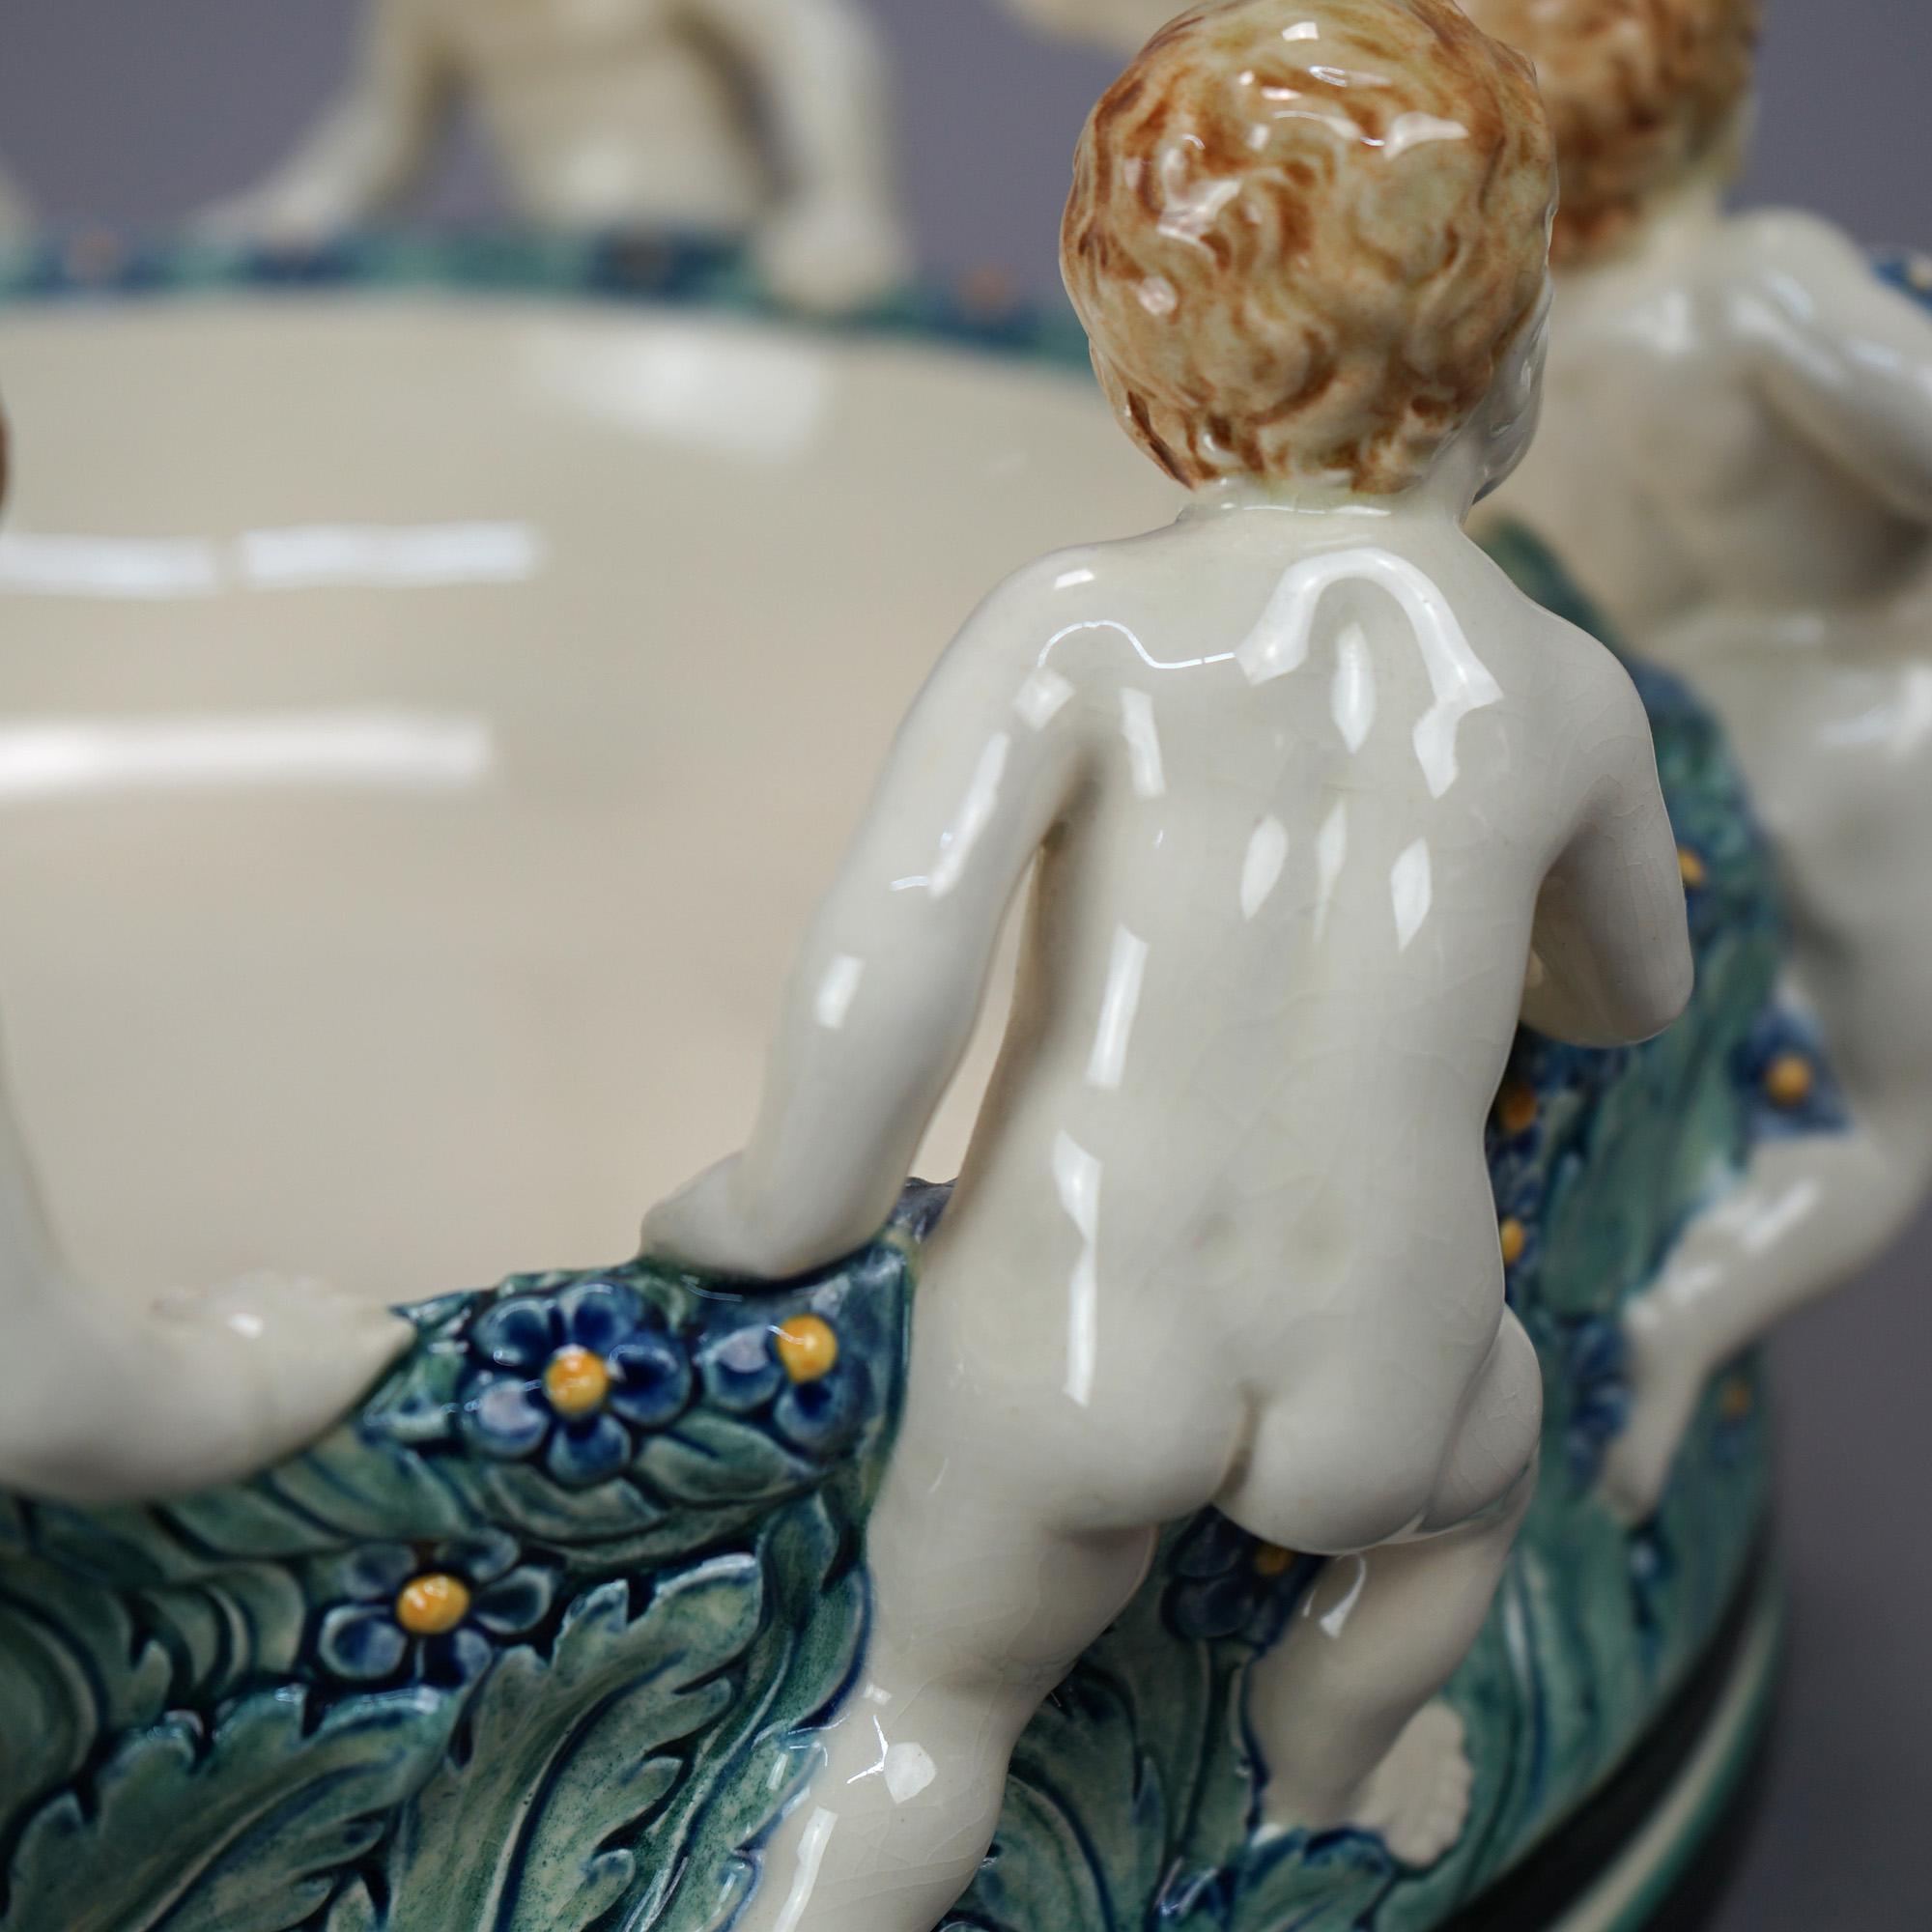 20th Century Antique Figural Wilhelm Majolica Pottery Center Bowl with Classical Putti, c1900